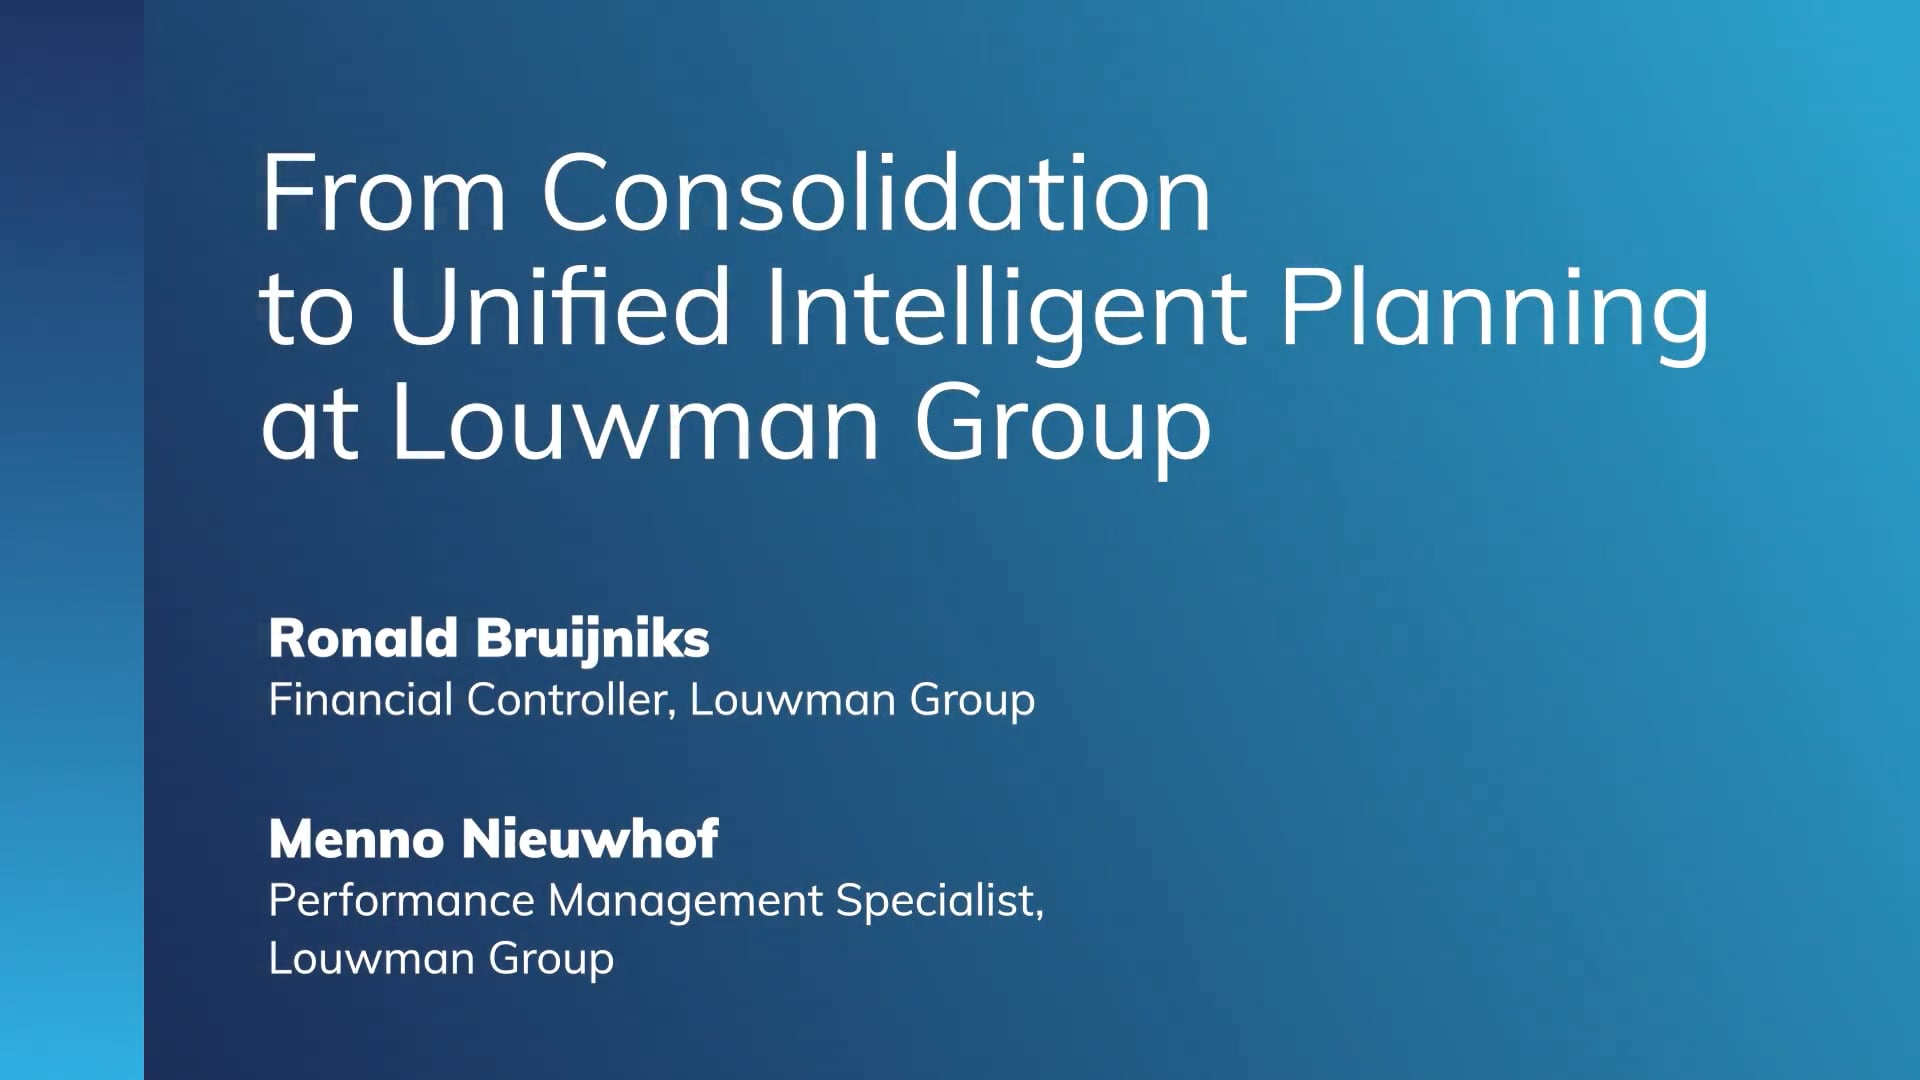 From Consolidation to Unified Intelligent Planning at Louwman Group